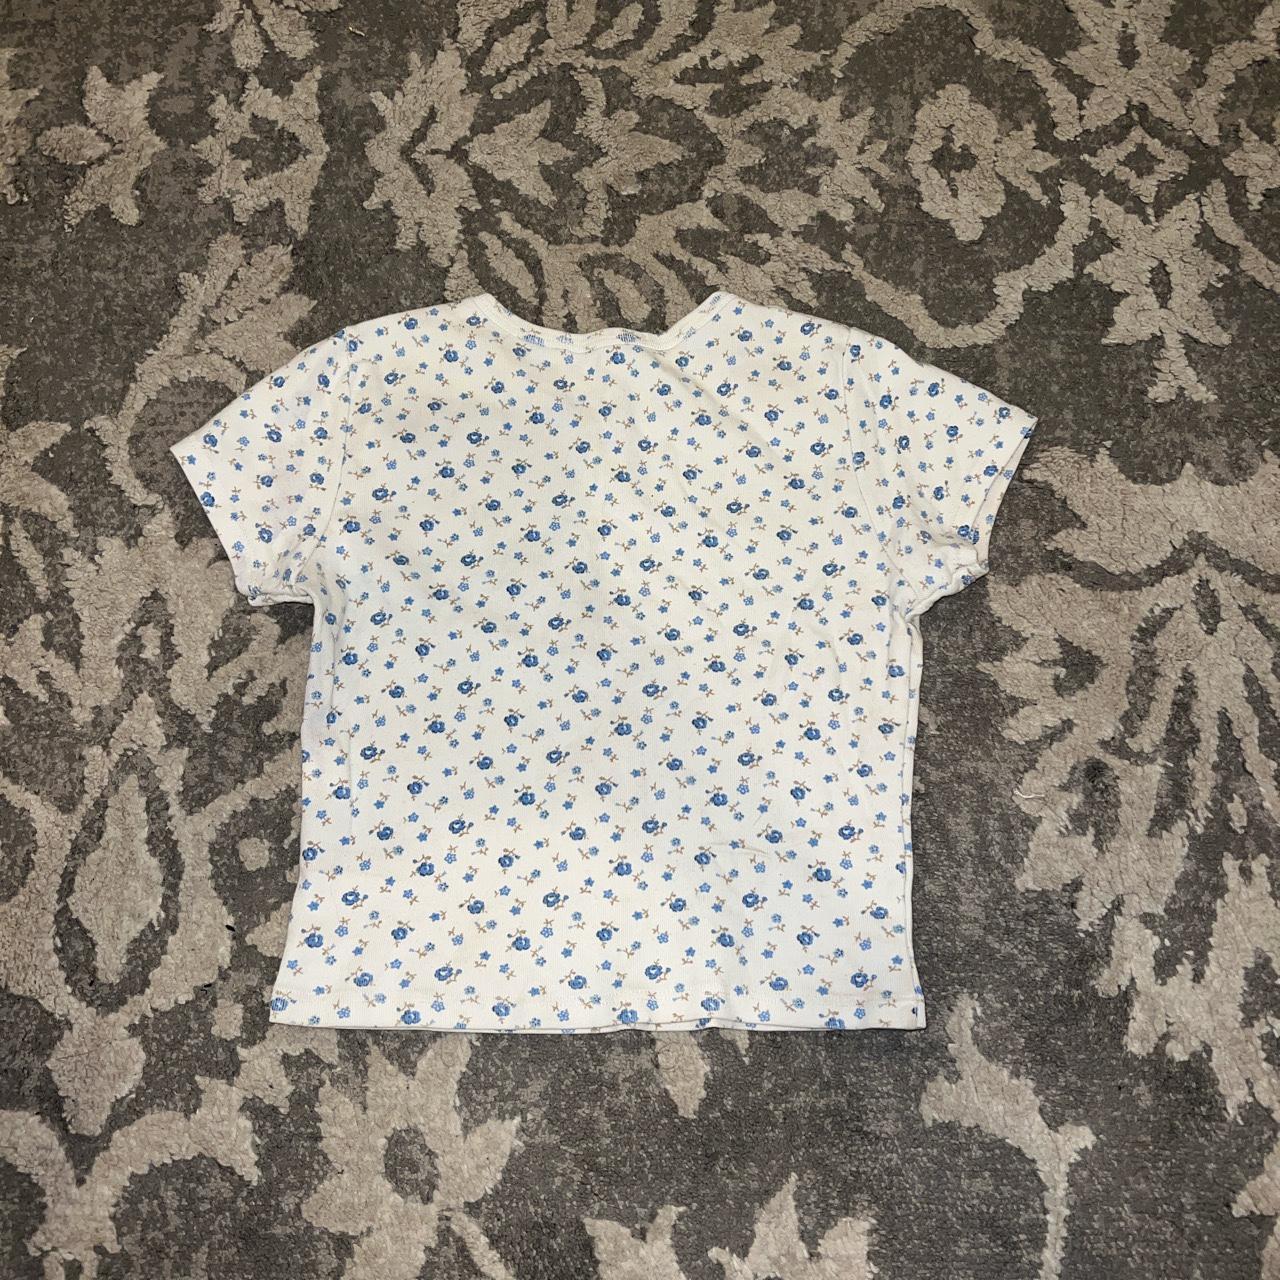 Blue floral Brandy Melville top💙🤍 it’s a really cute... - Depop